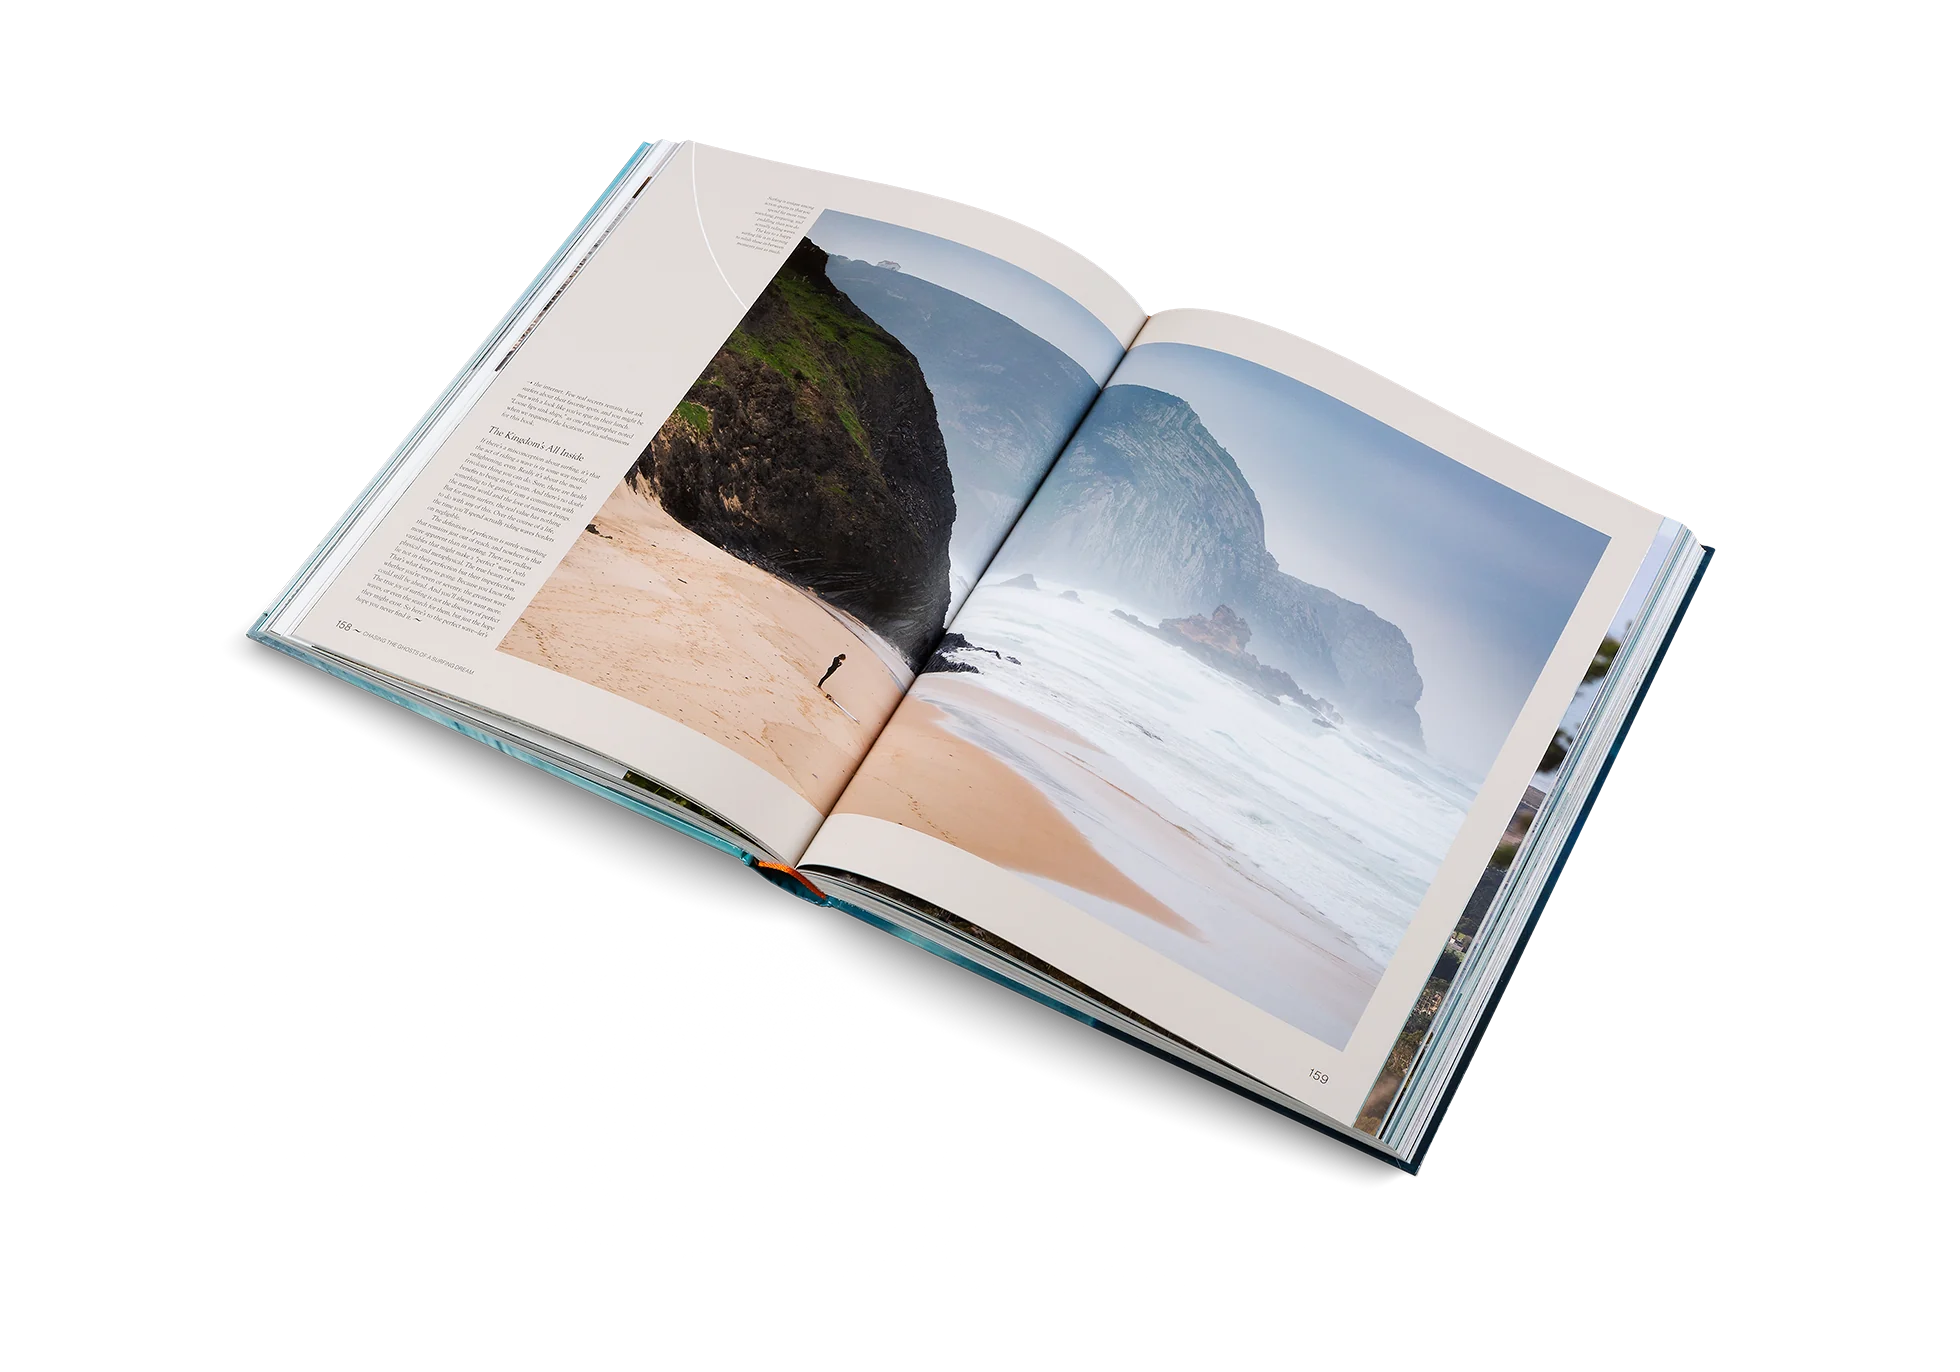 THE SURF ATLAS // Iconic Waves And Surfing Hinterlands